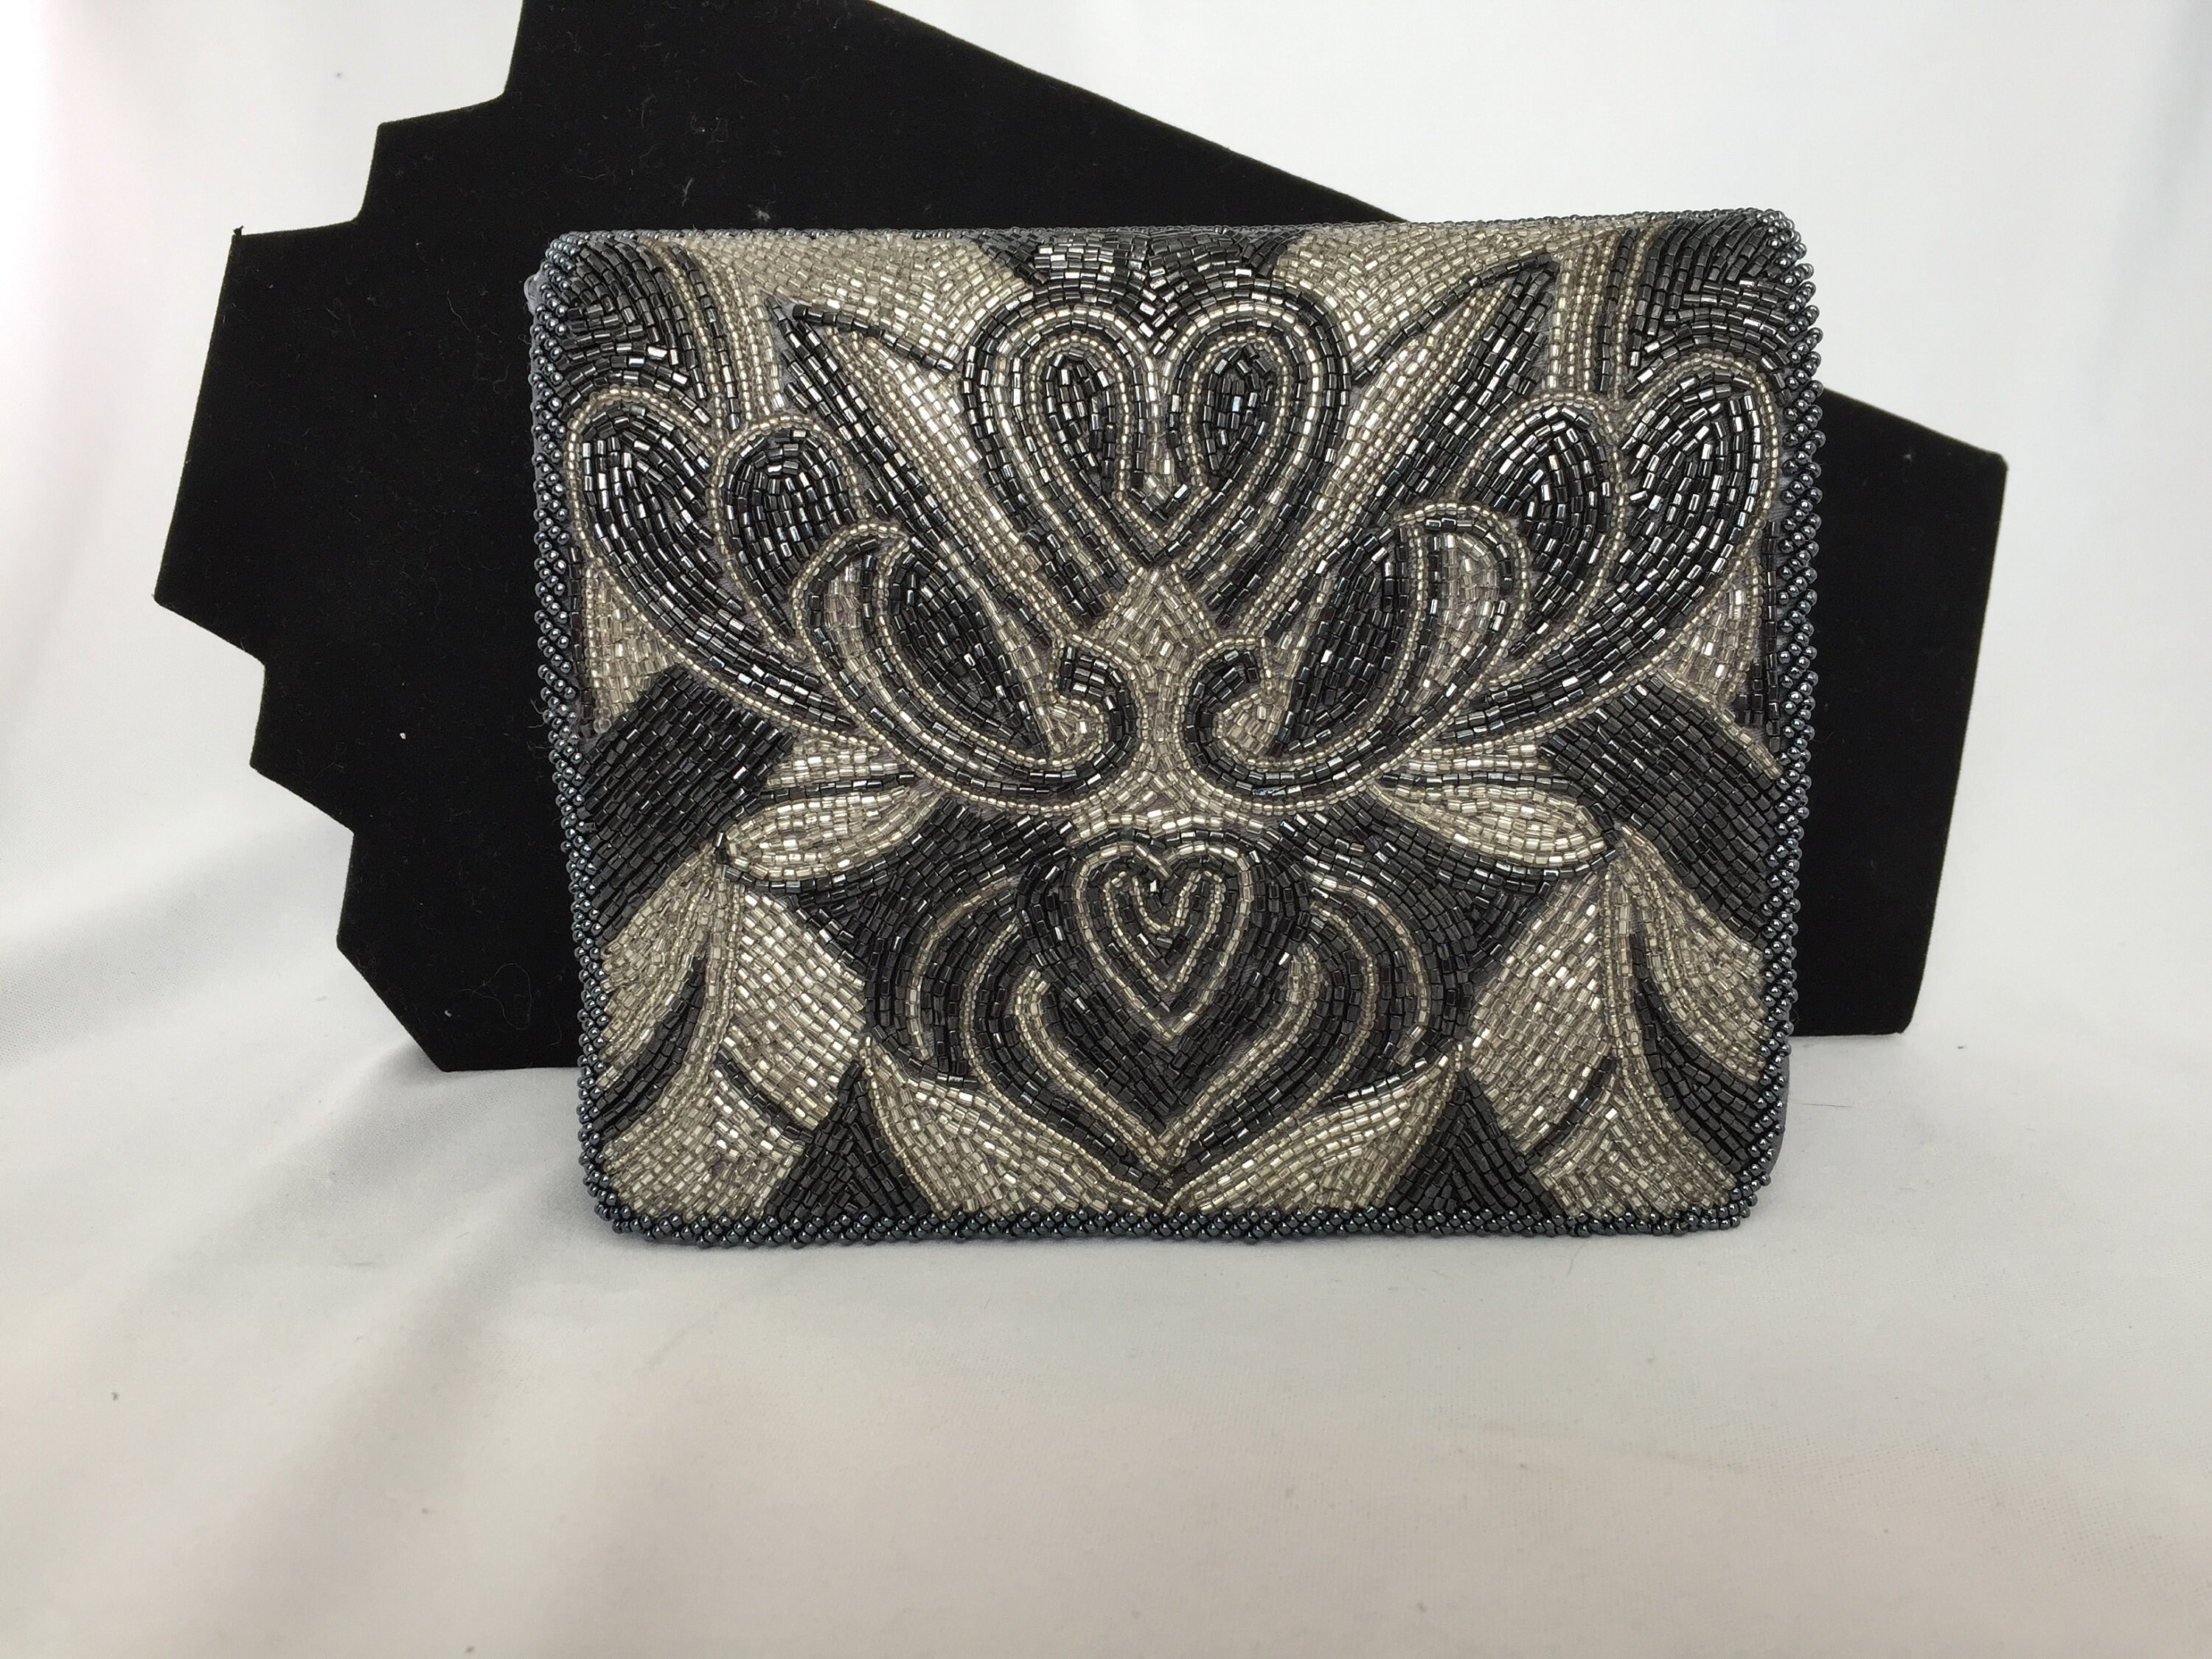 Embellished Strapless Handbag Clutch Purse - La Regale Products - Made in Japan with American Sequins - Previously Loved 